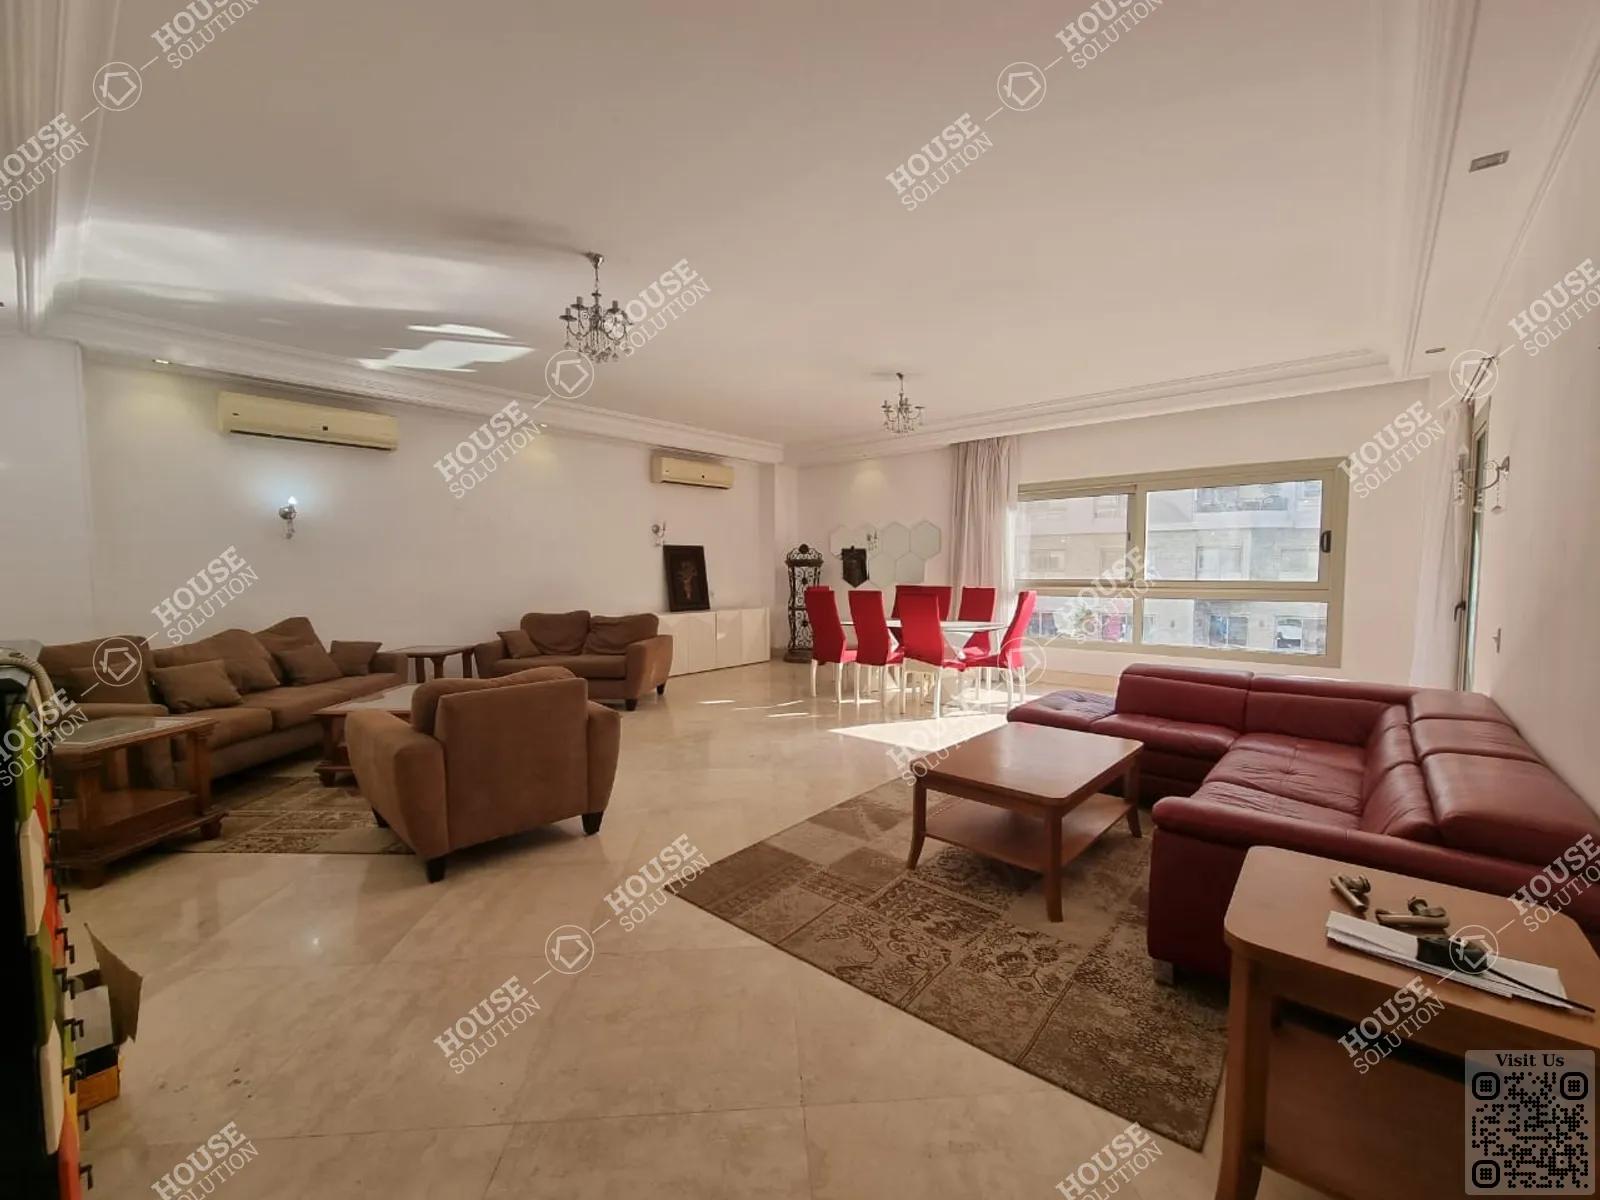 RECEPTION  @ Apartments For Rent In Maadi Maadi Sarayat Area: 320 m² consists of 4 Bedrooms 4 Bathrooms Modern furnished 5 stars #5086-0